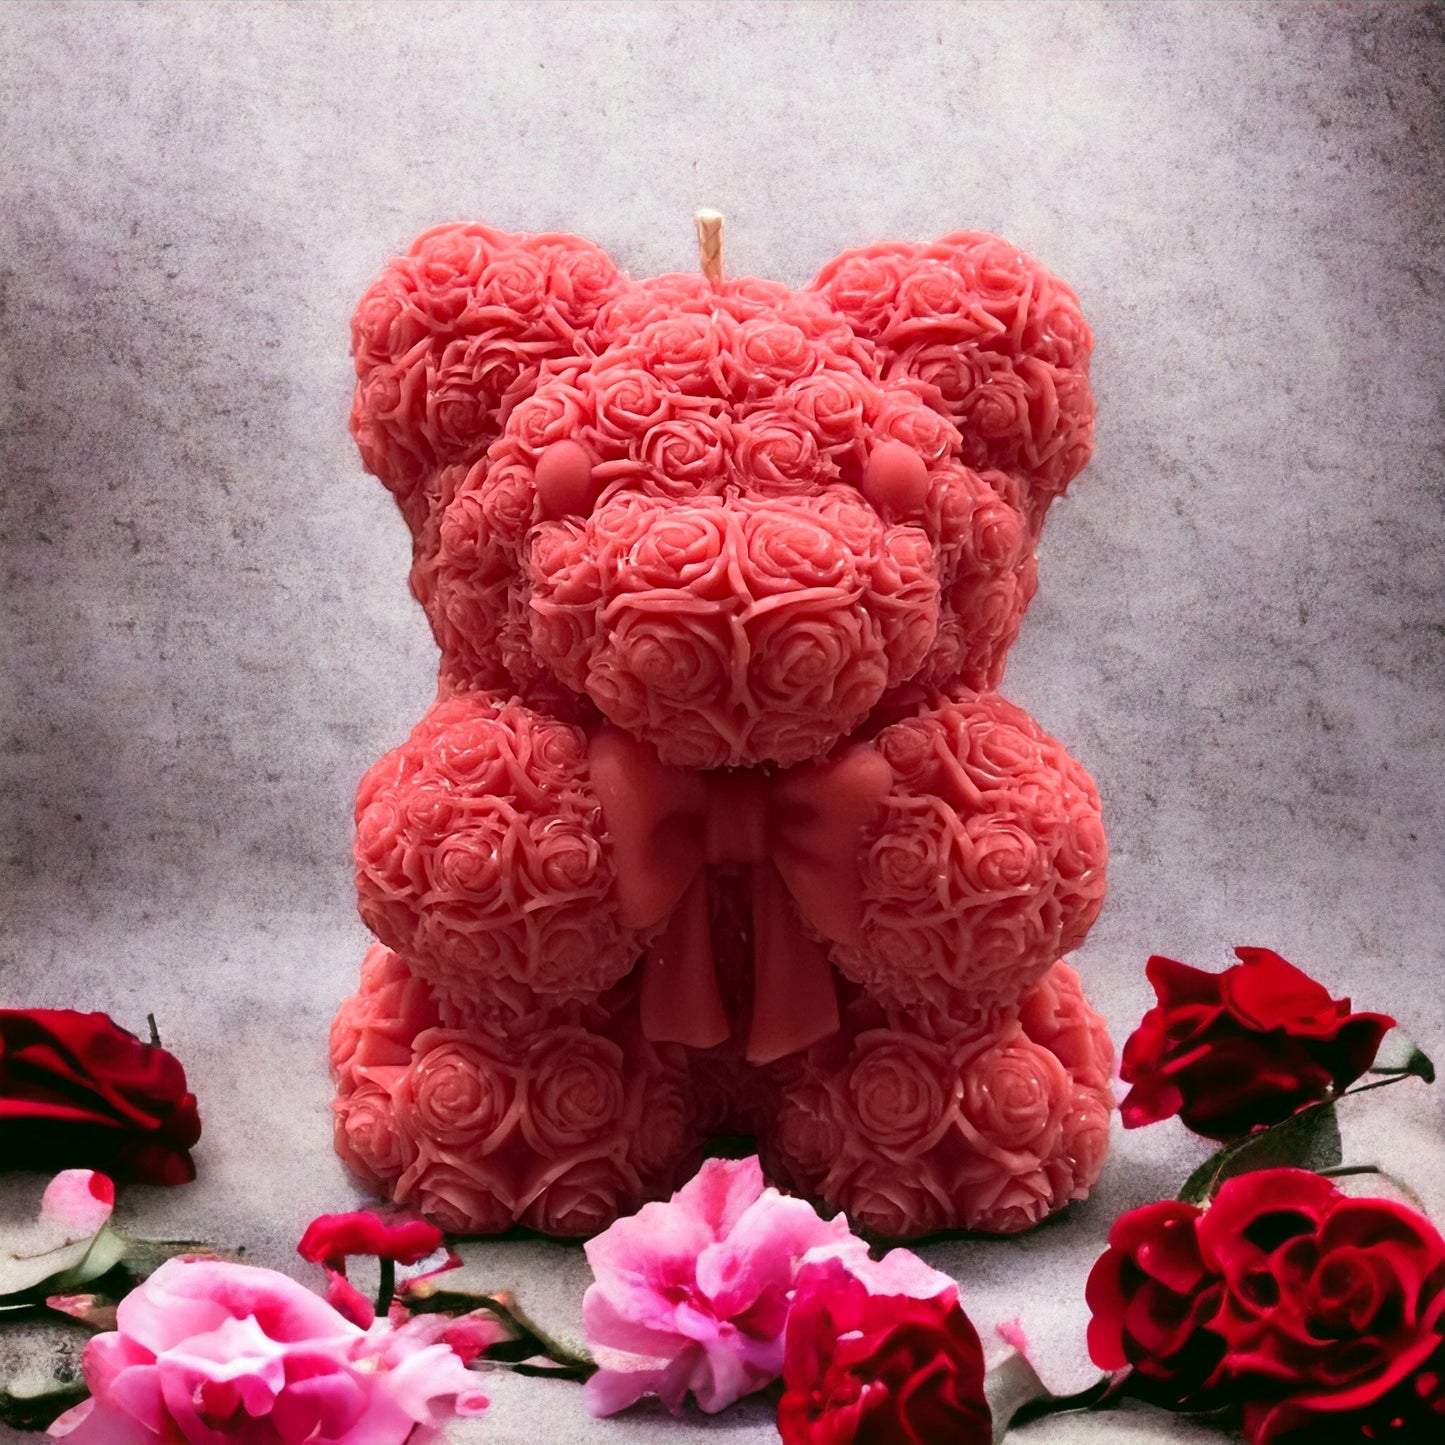  Teddy Bear Candle, Rose Teddy Bear Soy Candle, Valentine's  Day Gift